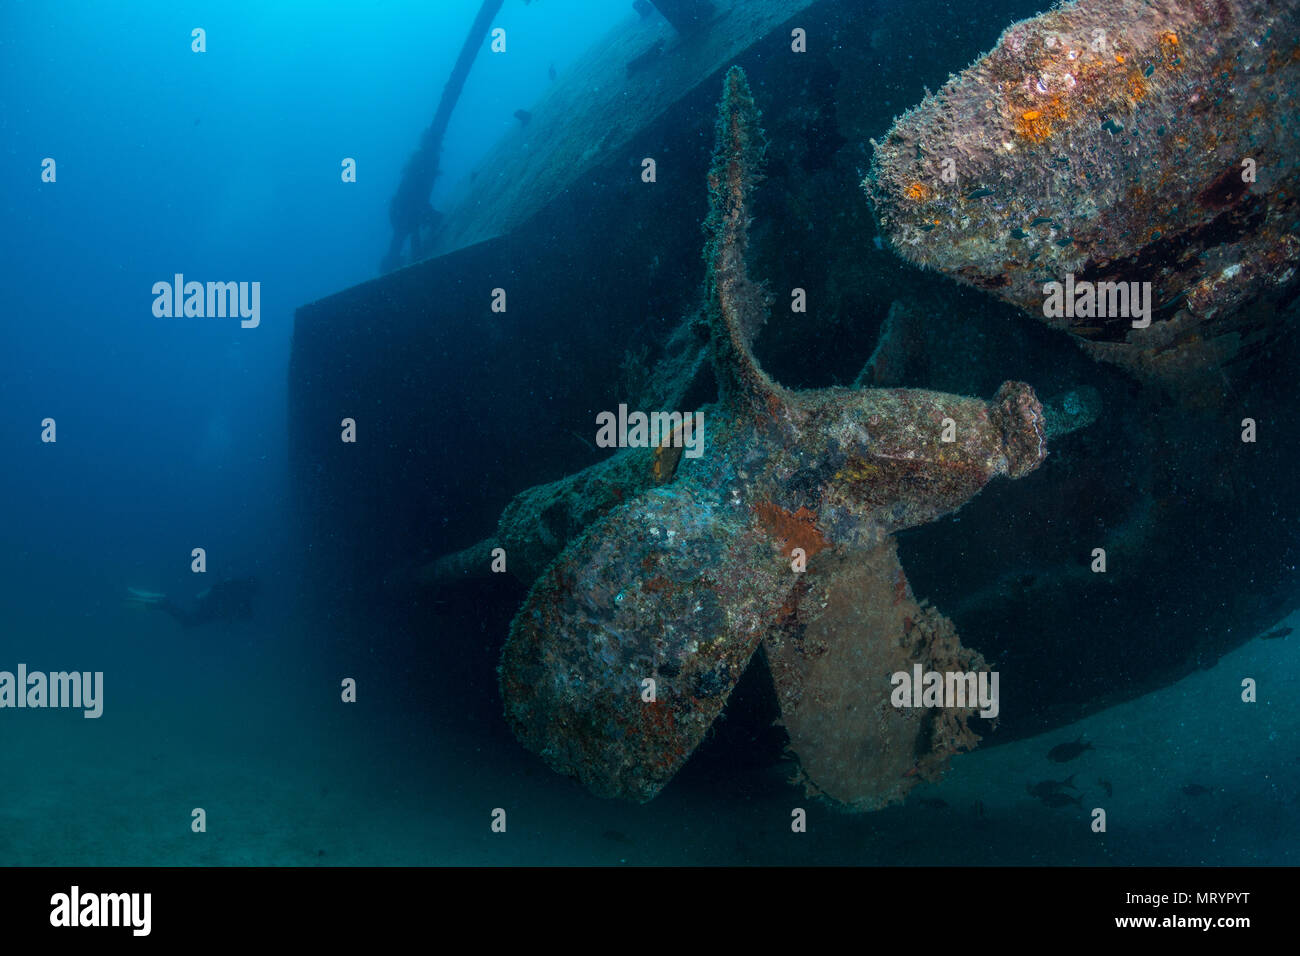 A view of the propeller of the C-59 shipwreck laying on the sand near La Paz, Mexico. Stock Photo